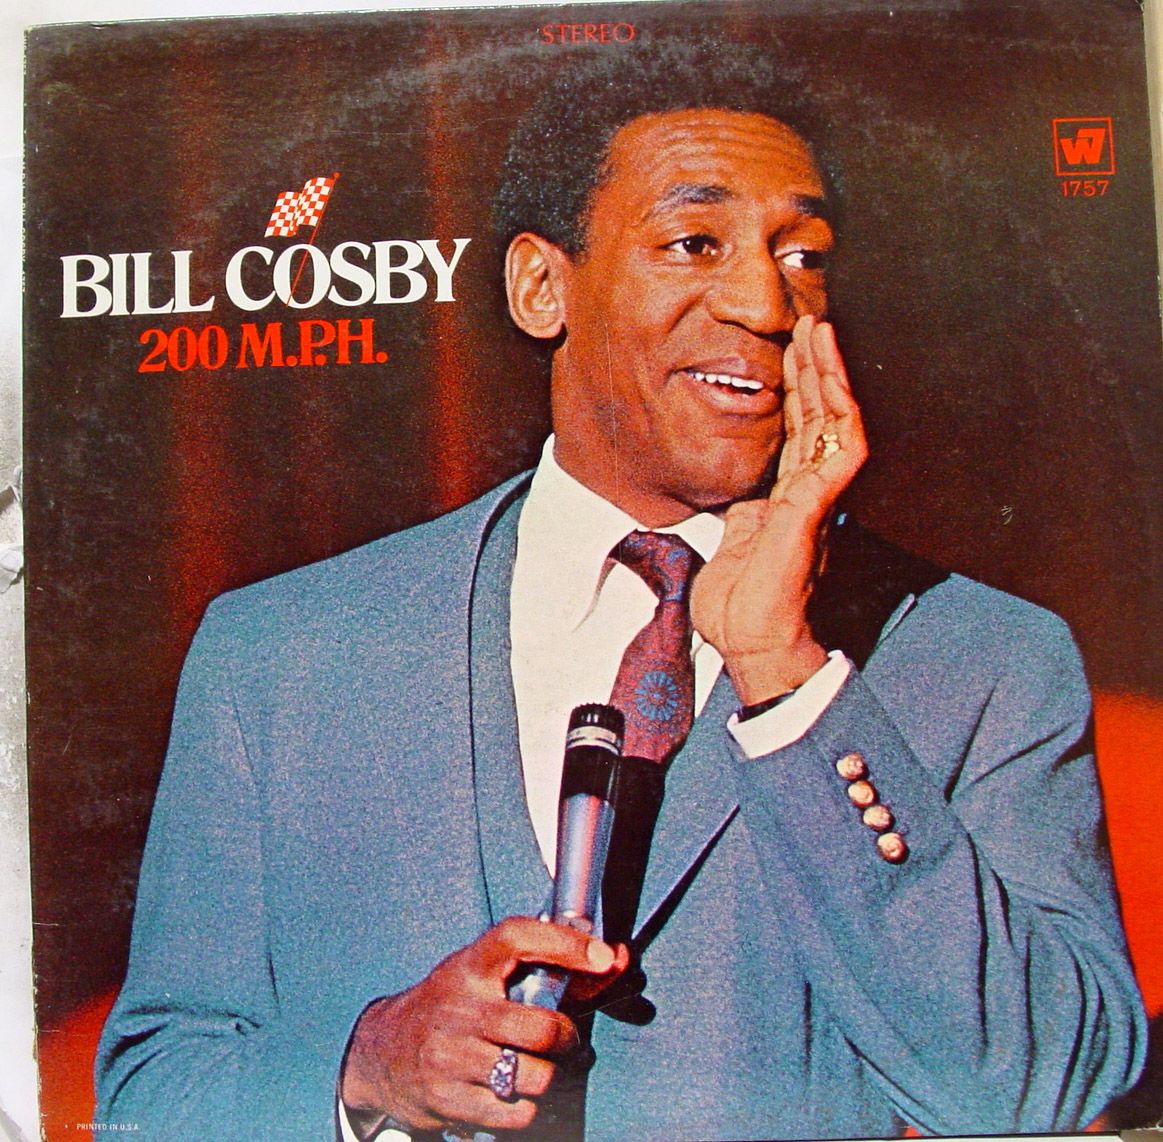 bill cosby 200 m p h label warner brothers records format 33 rpm 12 lp 